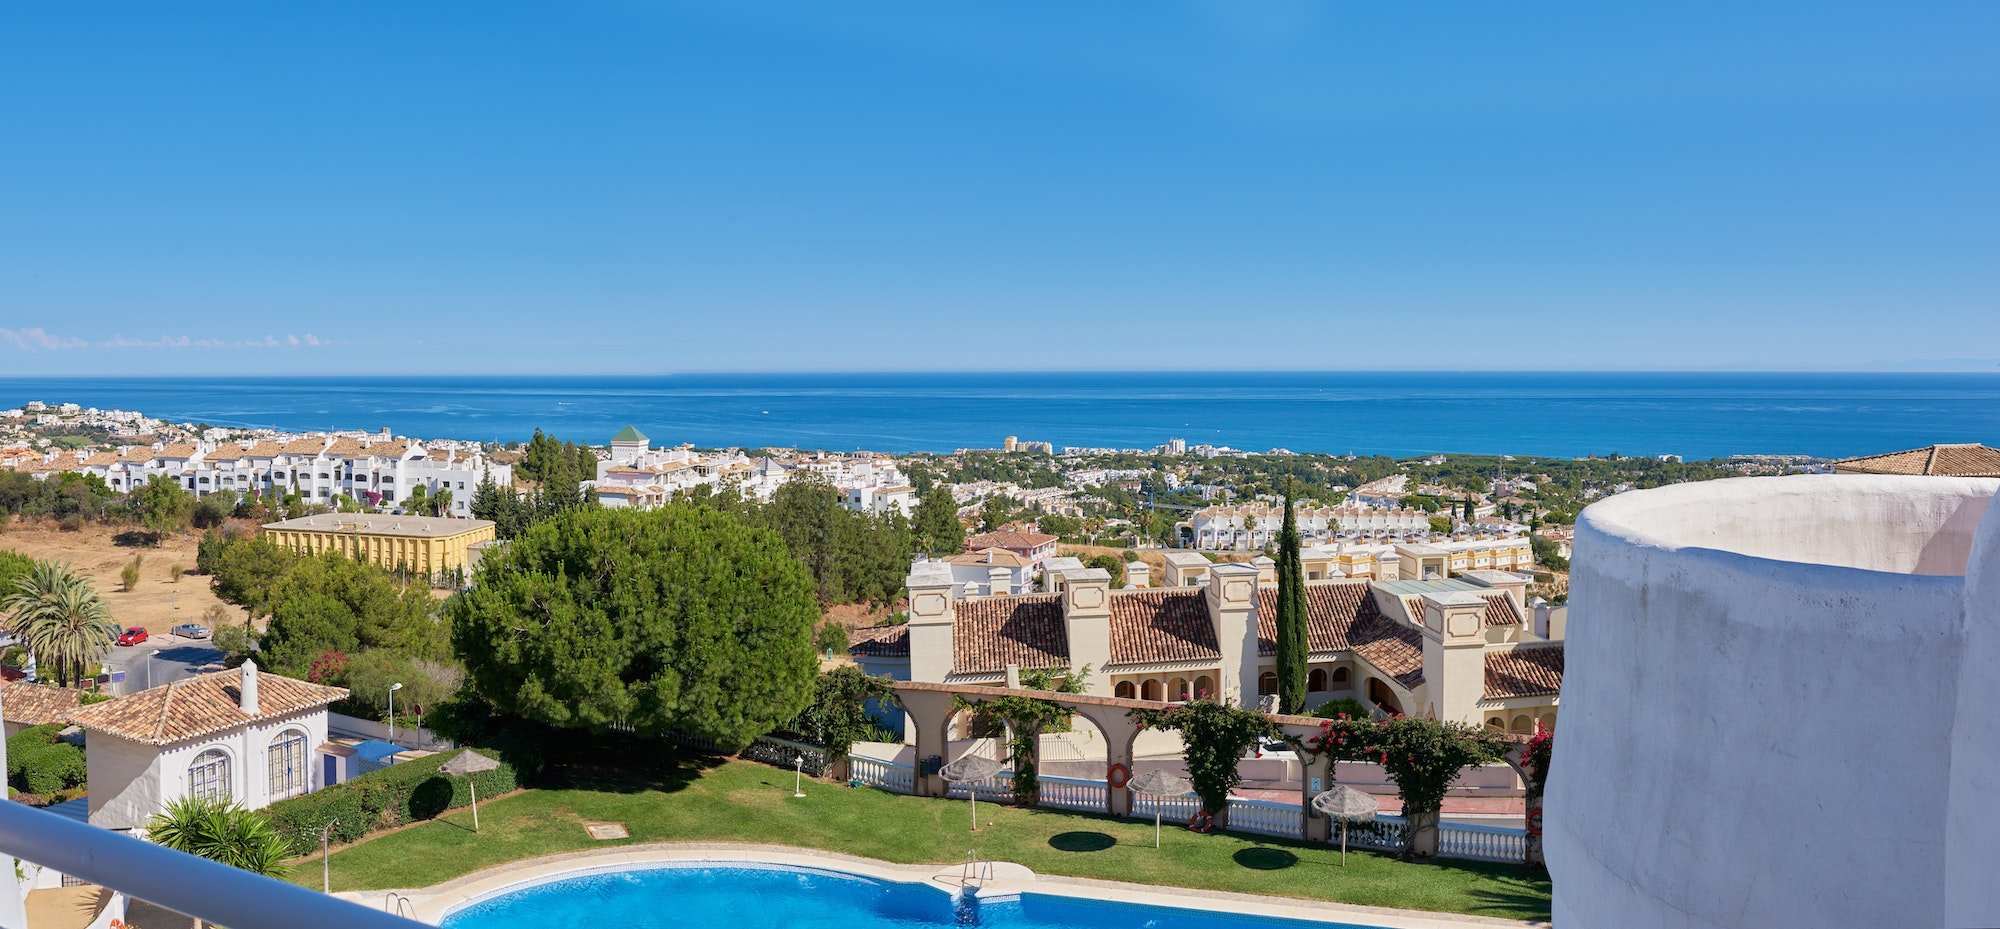 The Costa del Sol offers a wide range of properties to suit all tastes